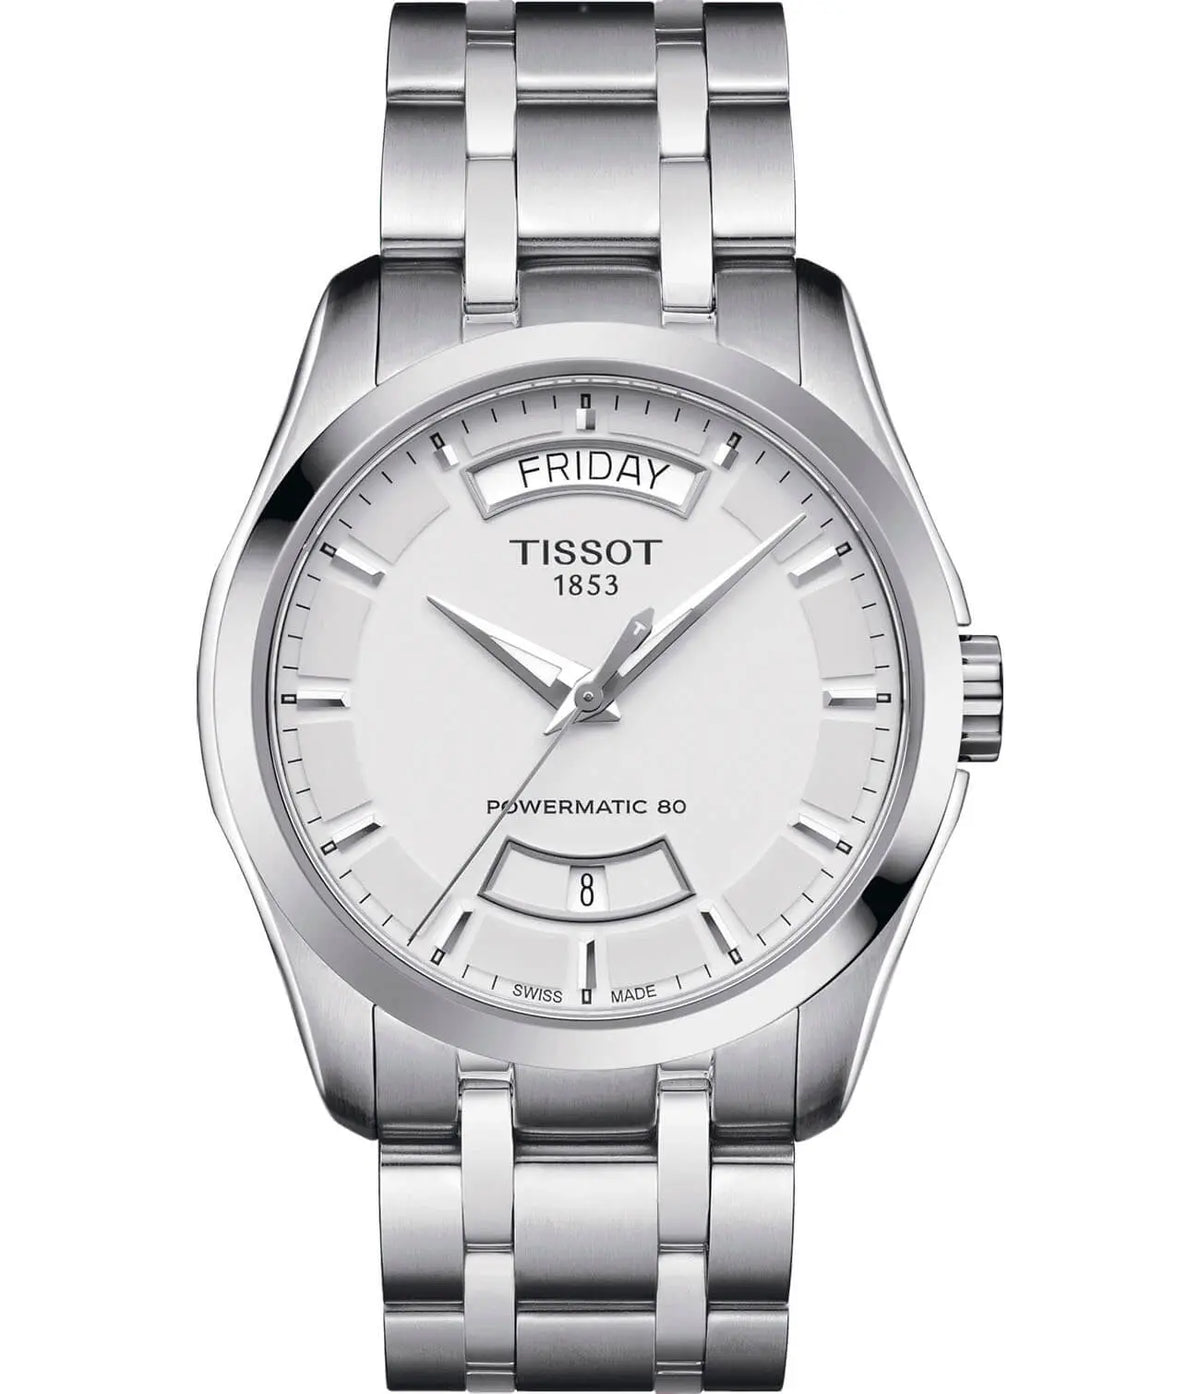 PRE-OWNED TISSOT COUTURIER AUTOMATIC SILVER DIAL WATCH T0354071103101